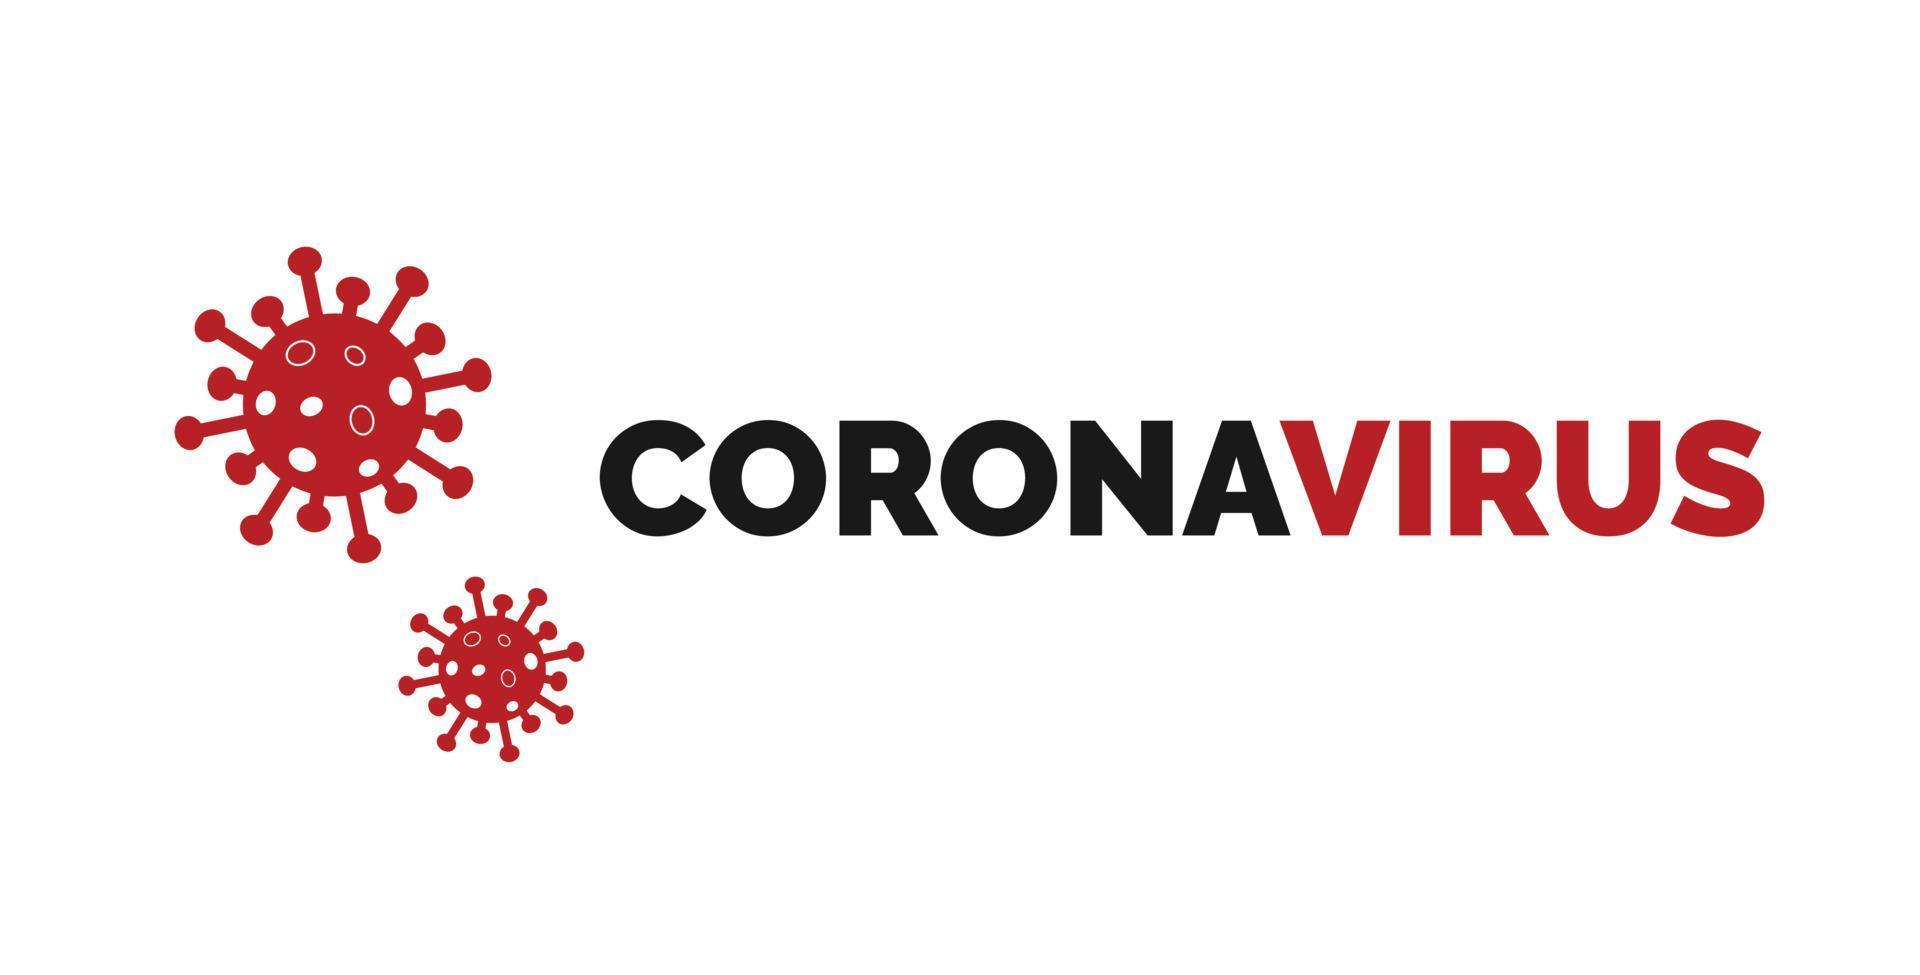 The word coronavirus written in red and black on a white background